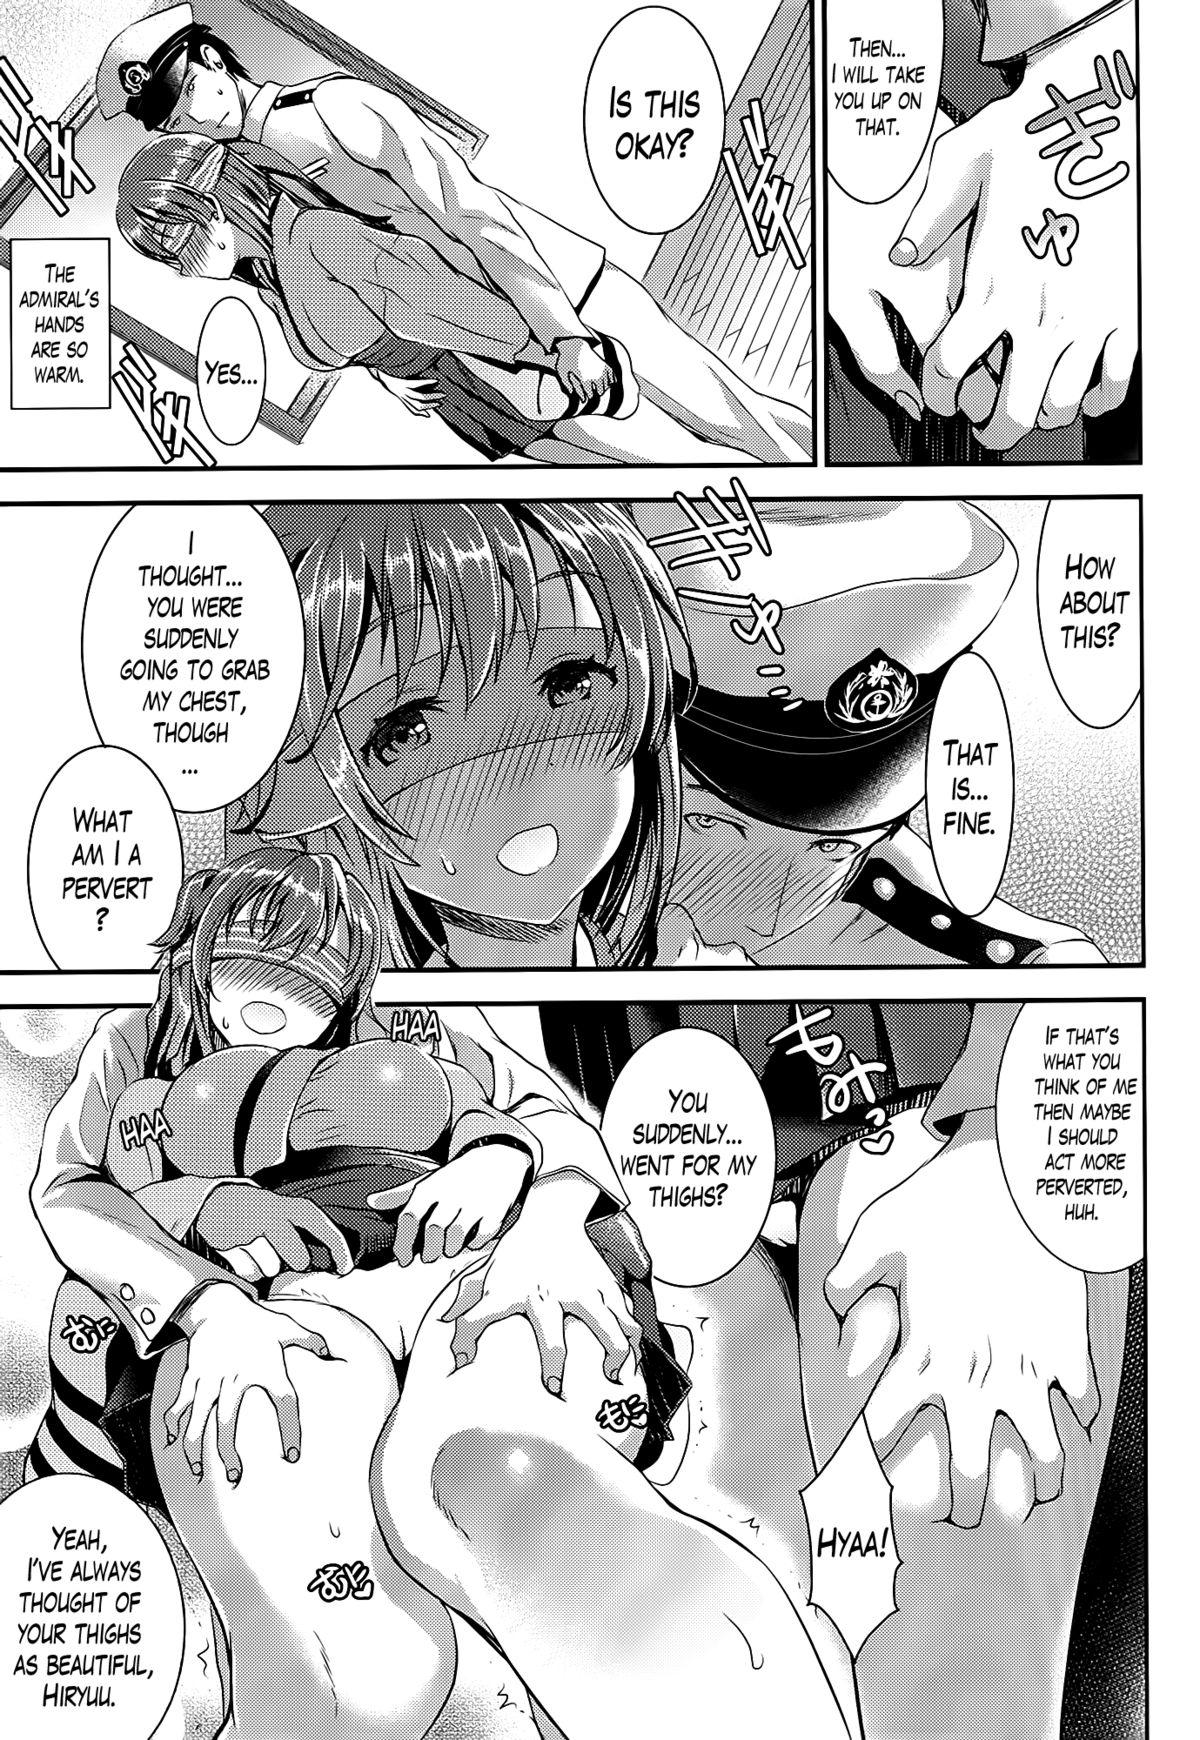 Pigtails Osawari Shitemo Ii desuyo | You Can Touch Me, You Know? - Kantai collection Indian Sex - Page 7